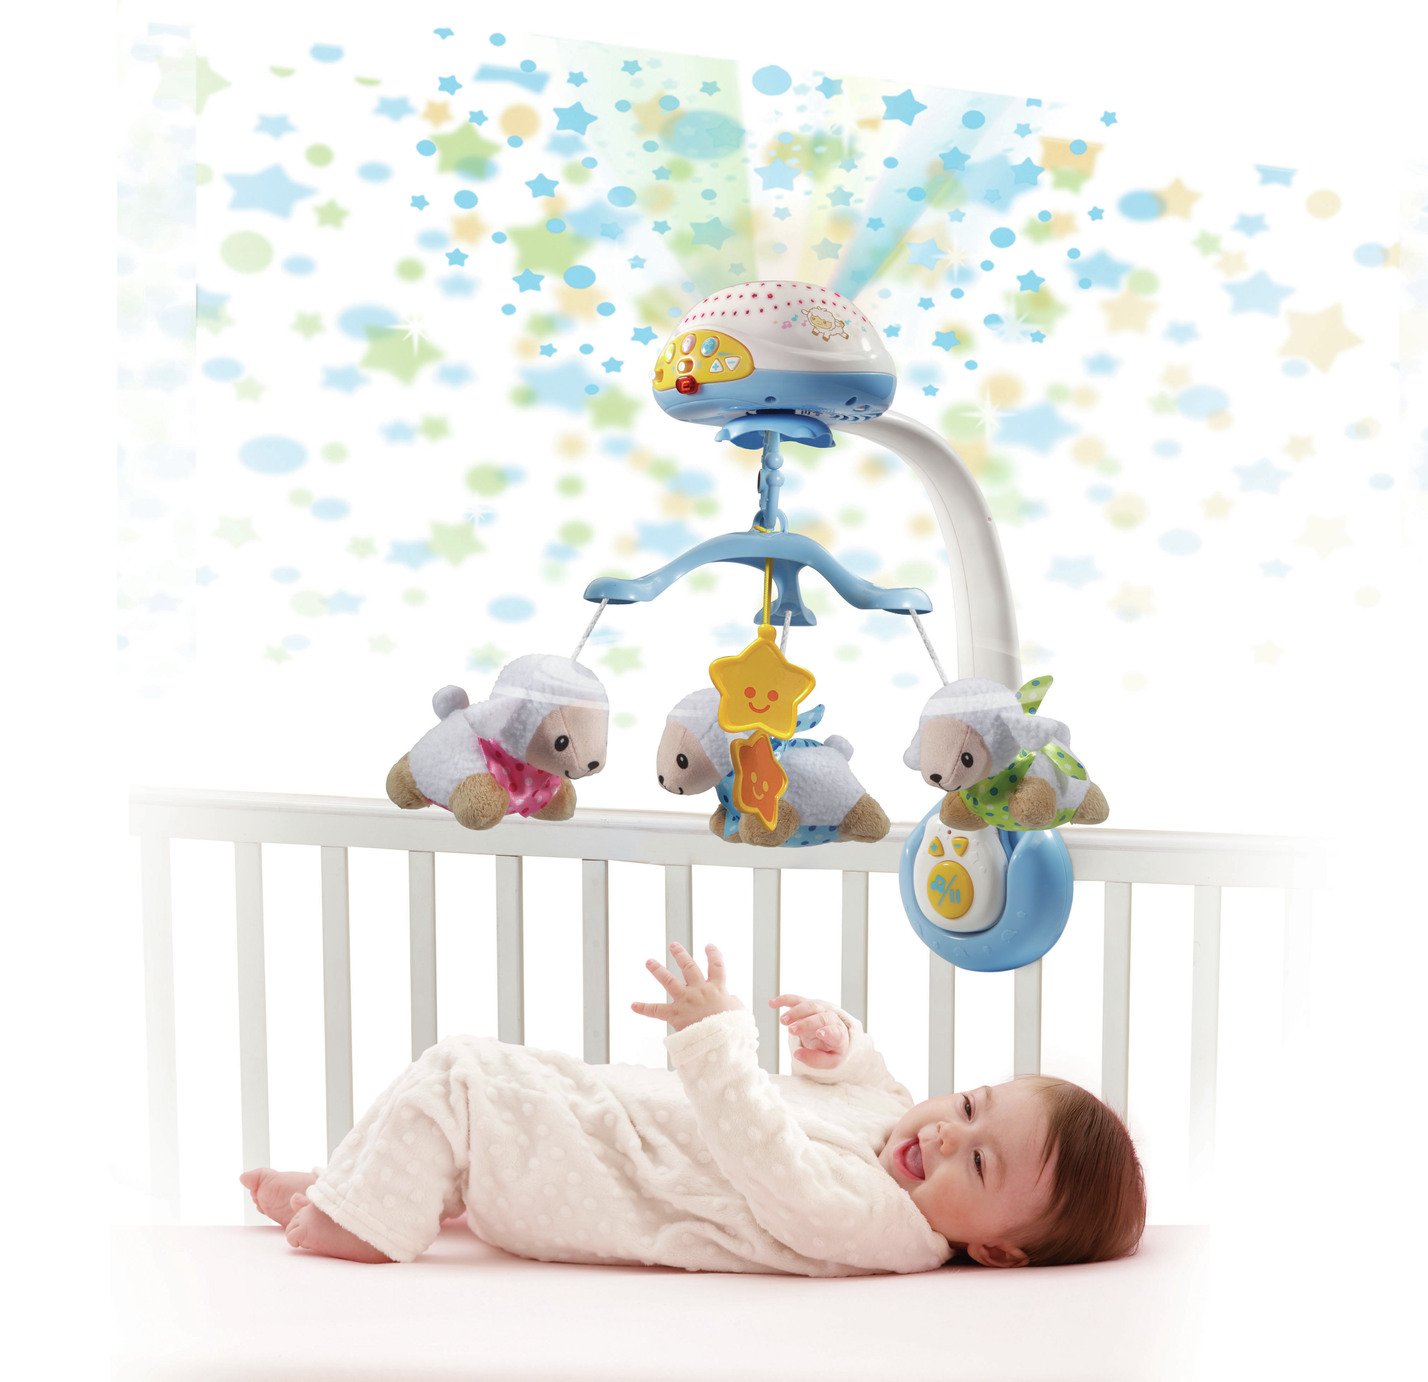 VTech Lullaby Lambs Cot Mobile Review